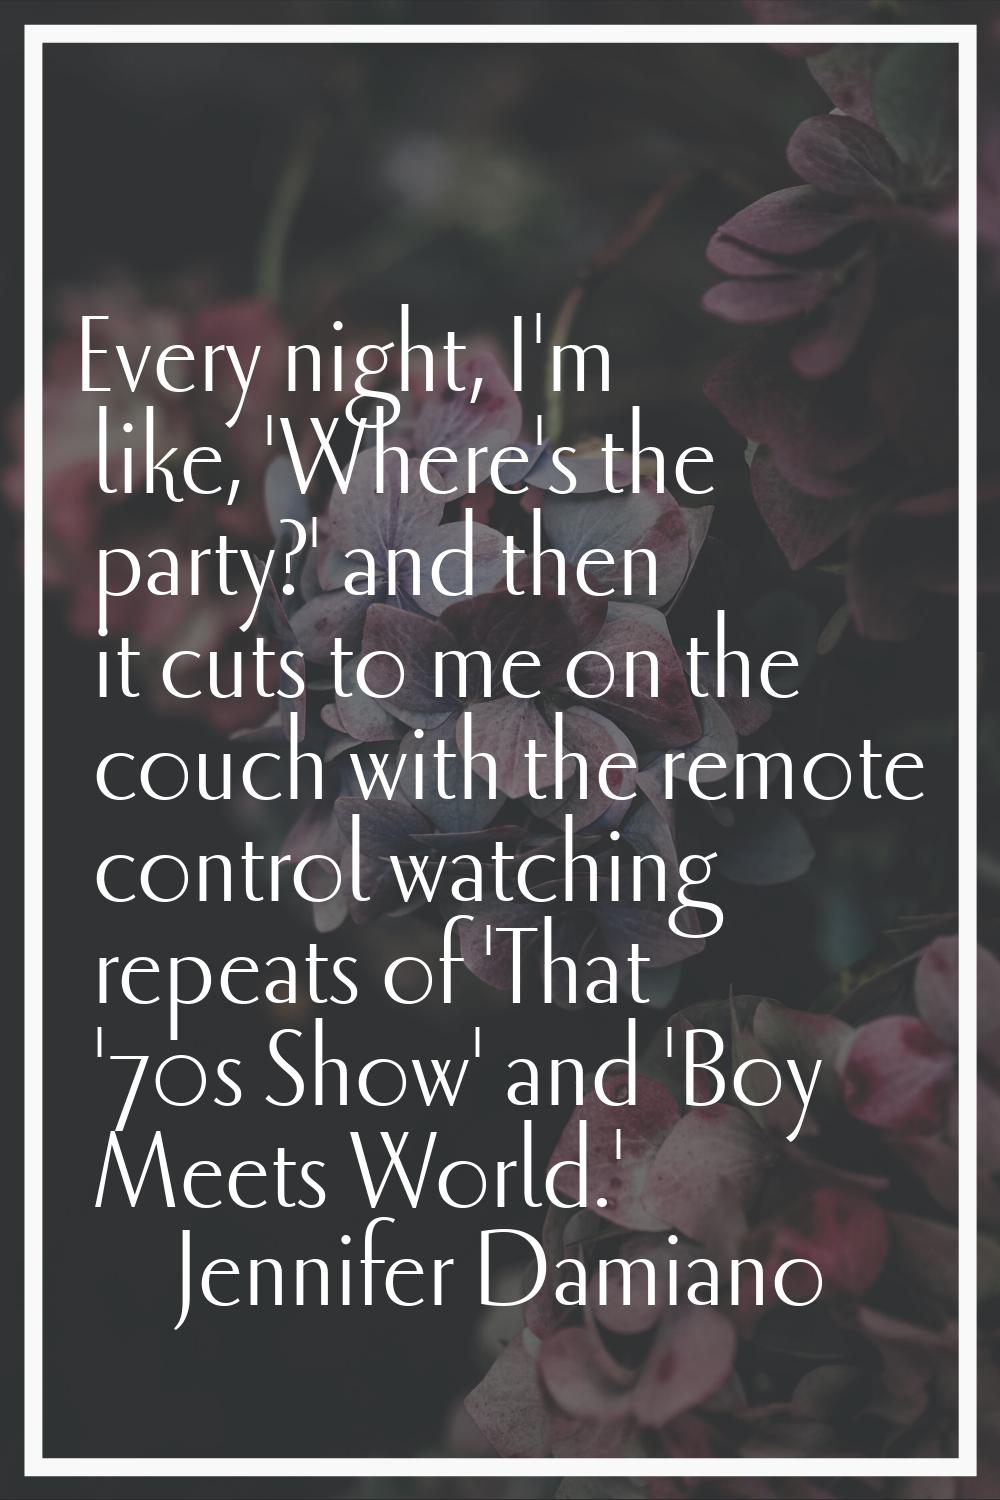 Every night, I'm like, 'Where's the party?' and then it cuts to me on the couch with the remote con